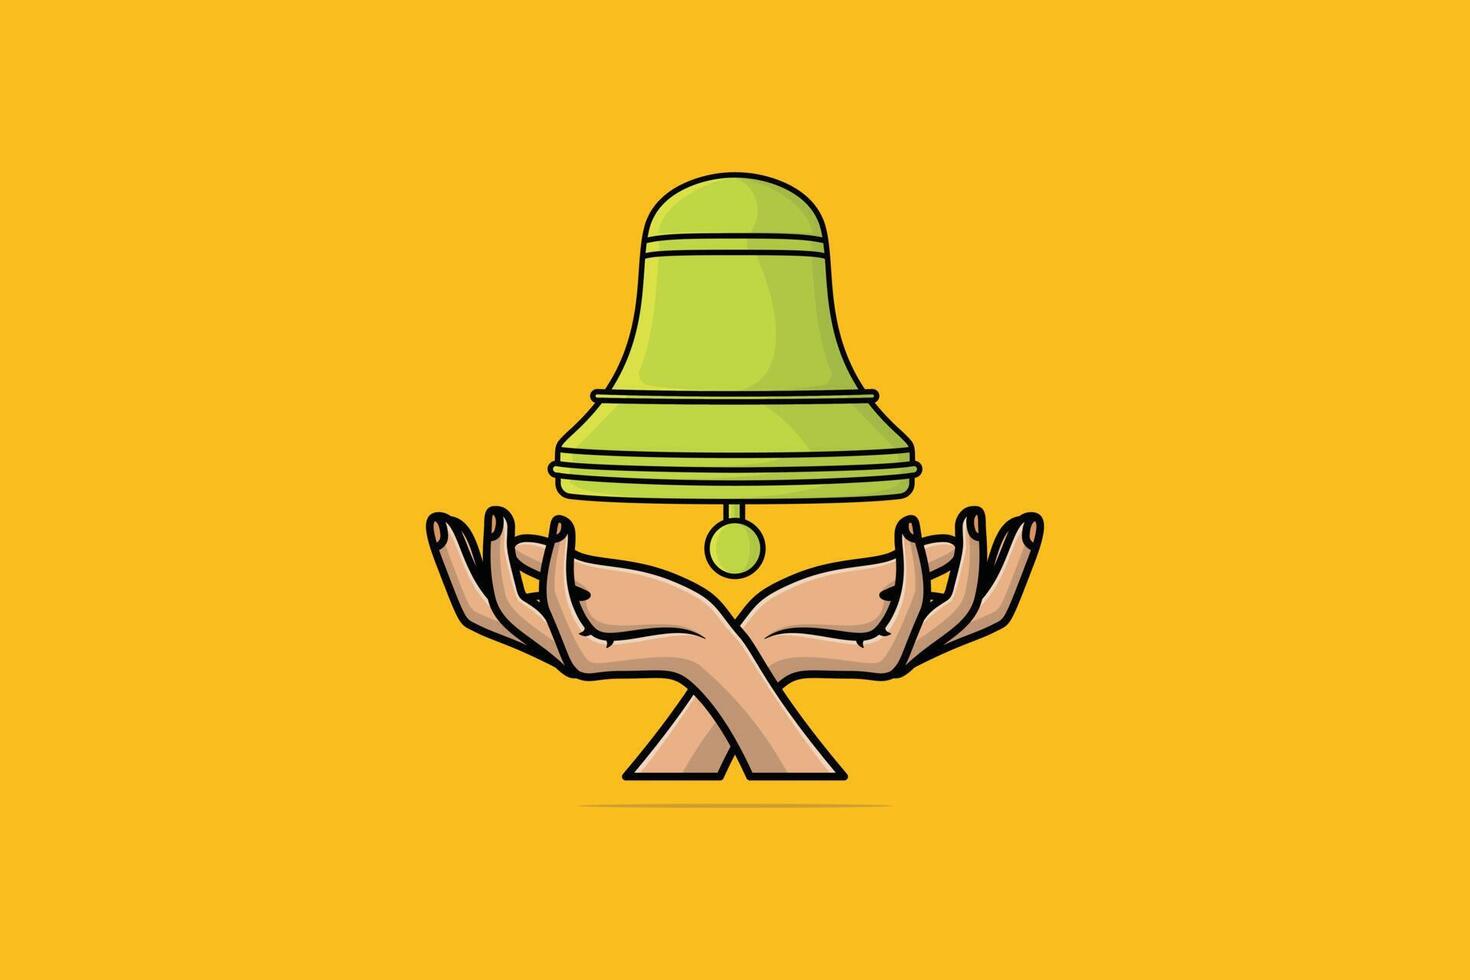 Green School Bell with People Hands vector illustration. Alert and alarm objects icon design concept. Isolated bell in hand on orange background. Creative hand bell icon logo.